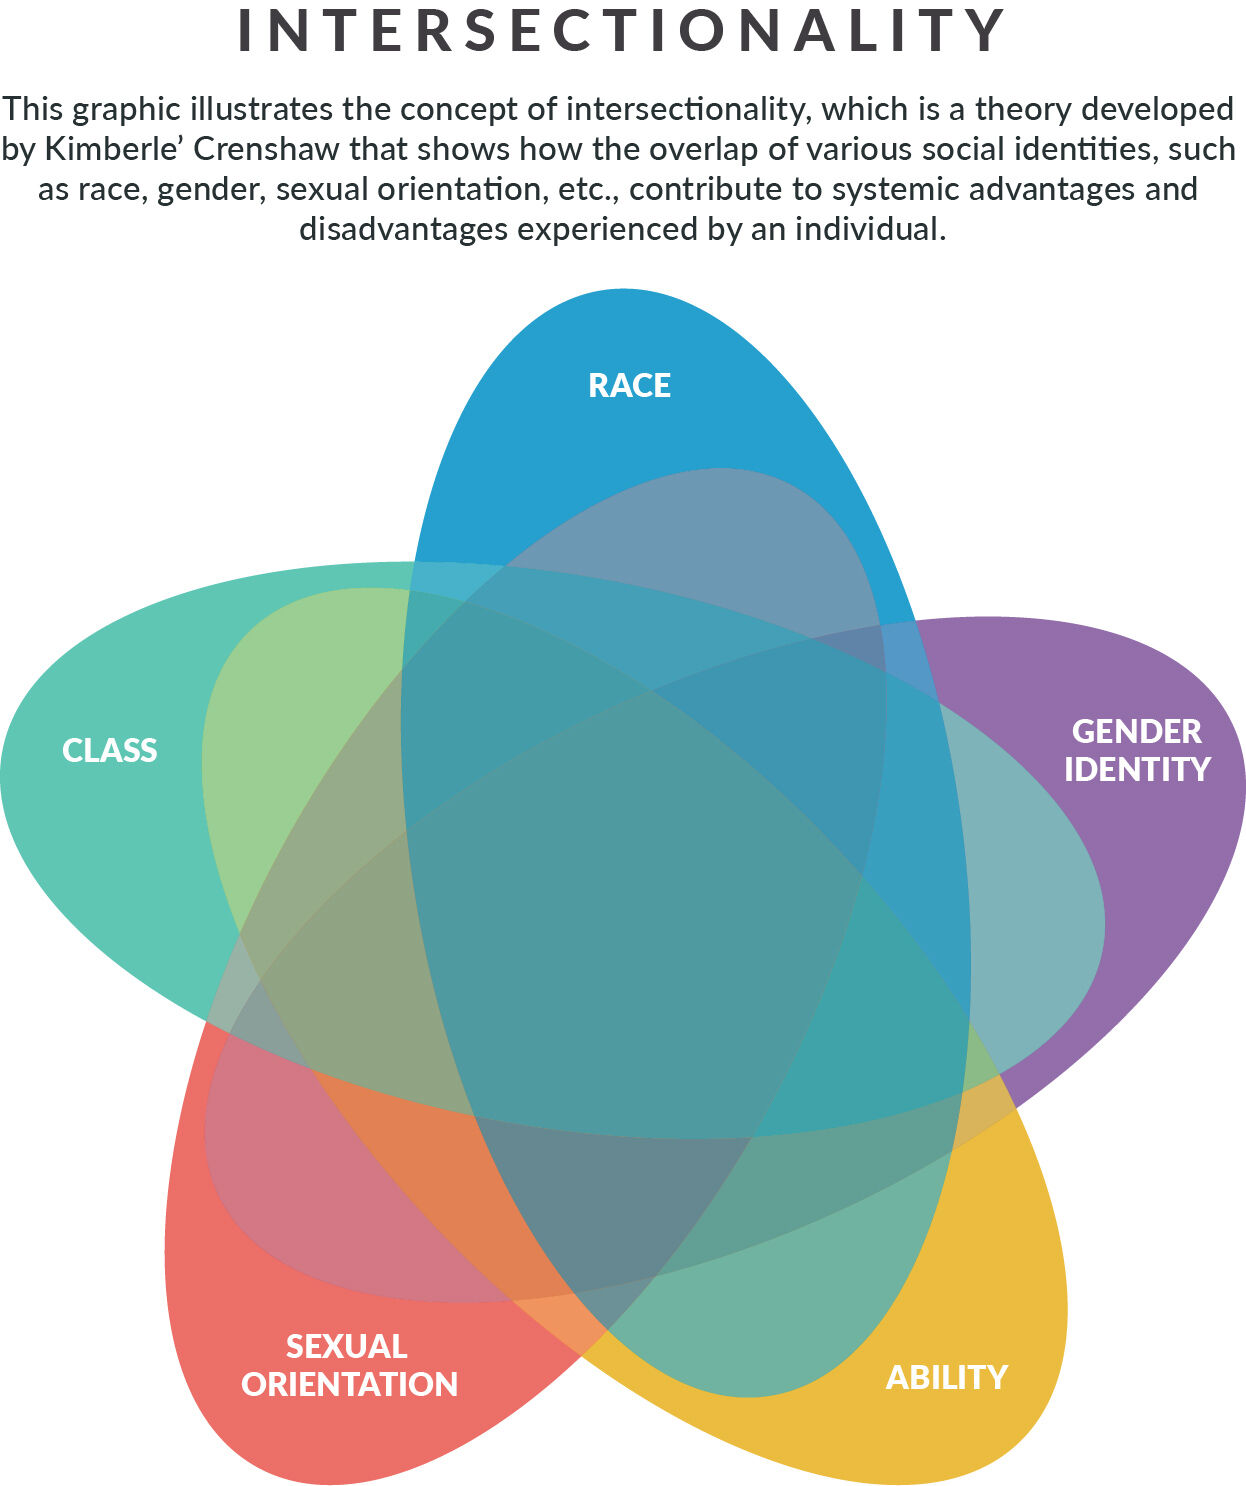 Intersectionality Graphic displaying the intersections of race, class, gender identity, ability and sexual orientation.